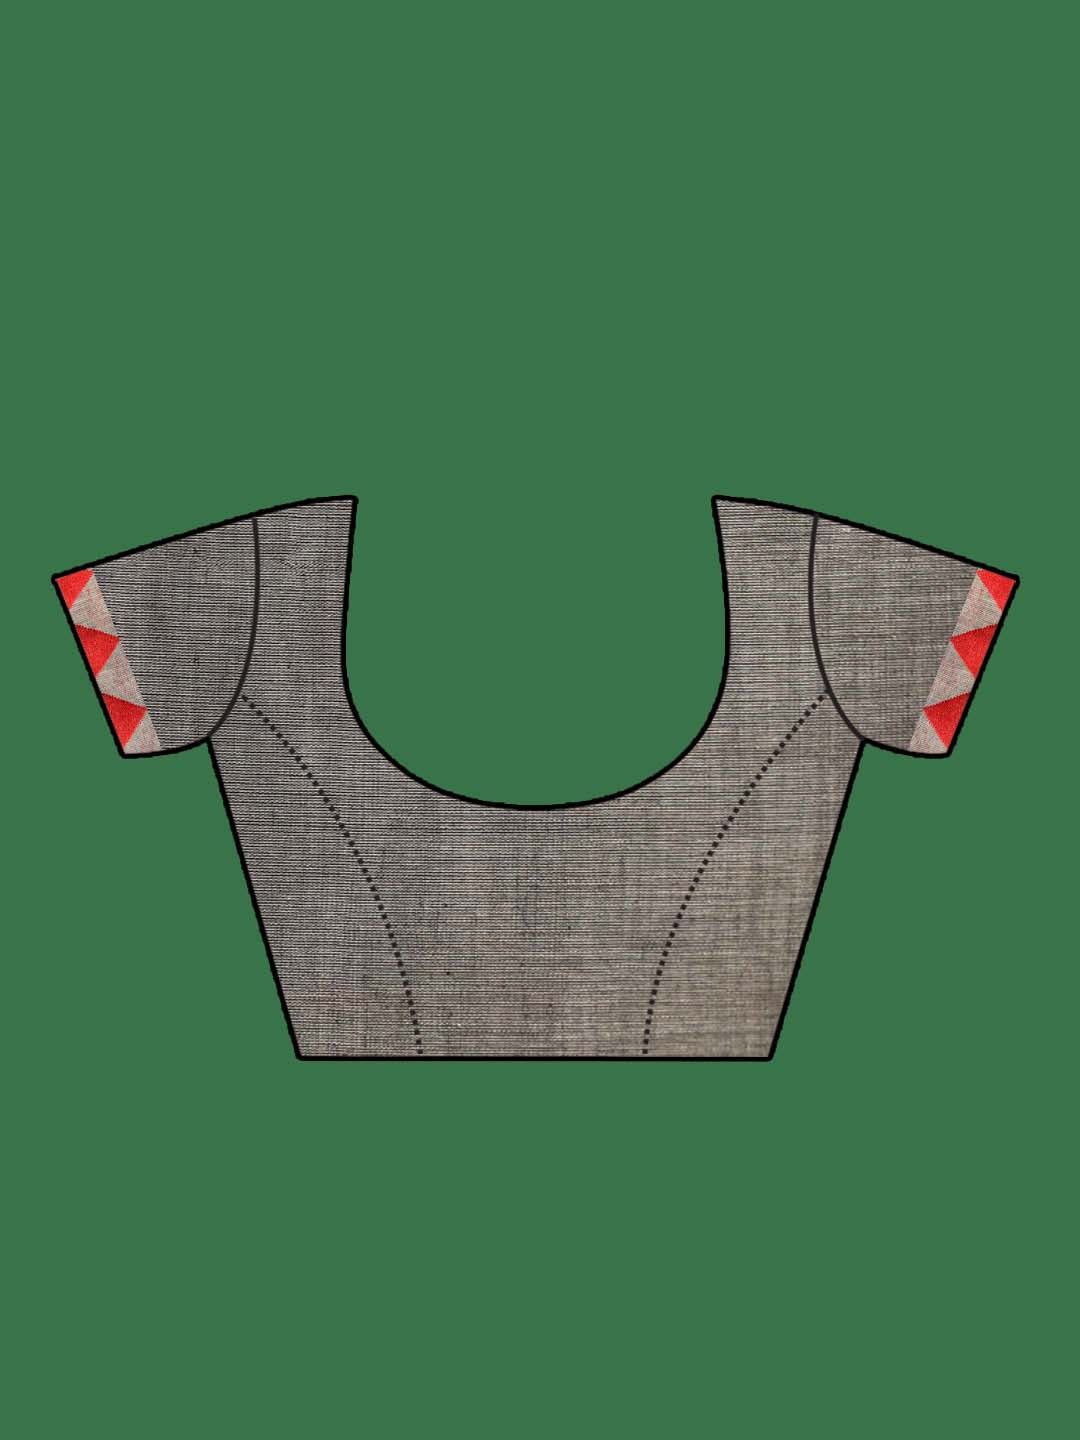 Indethnic Red and Grey Solid Colour Blocked Saree - Blouse Piece View